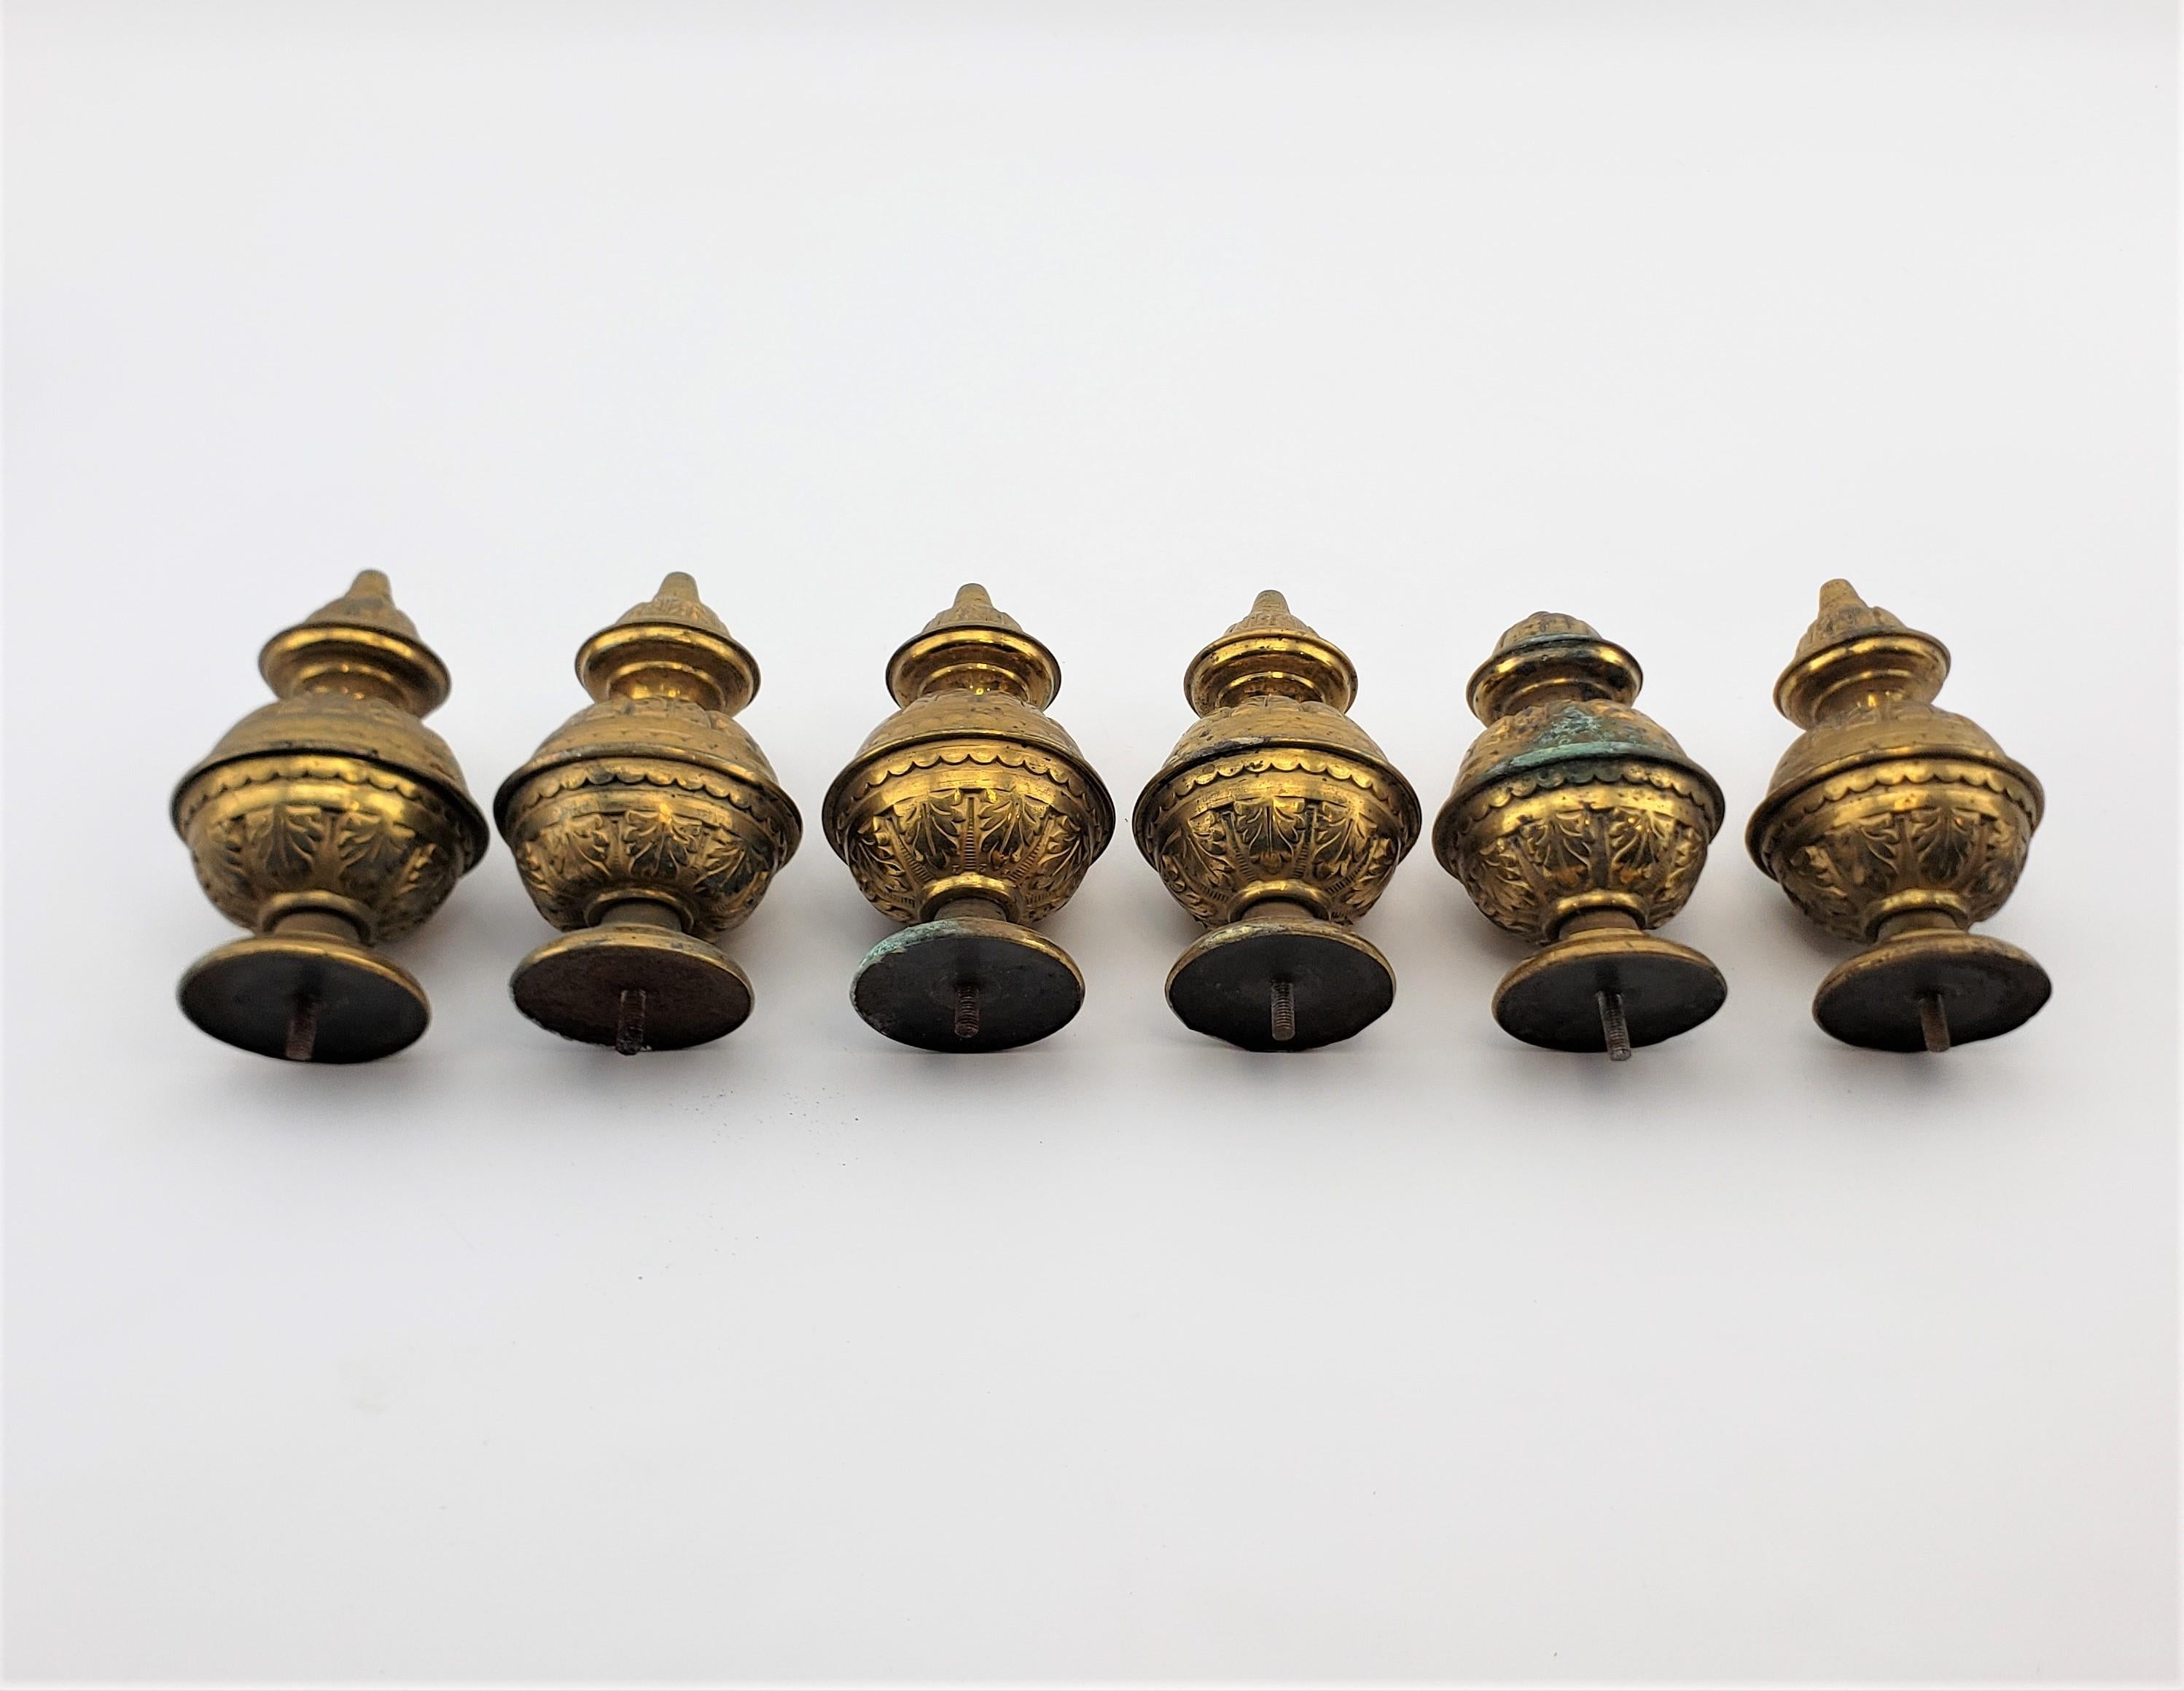 This set of six antique brass finials are unsigned, but presumed to have originated from the United States in circa 1890 in a period Victorian style. The finials are matching, although one is slightly shorter, and done in hollow brass with raised